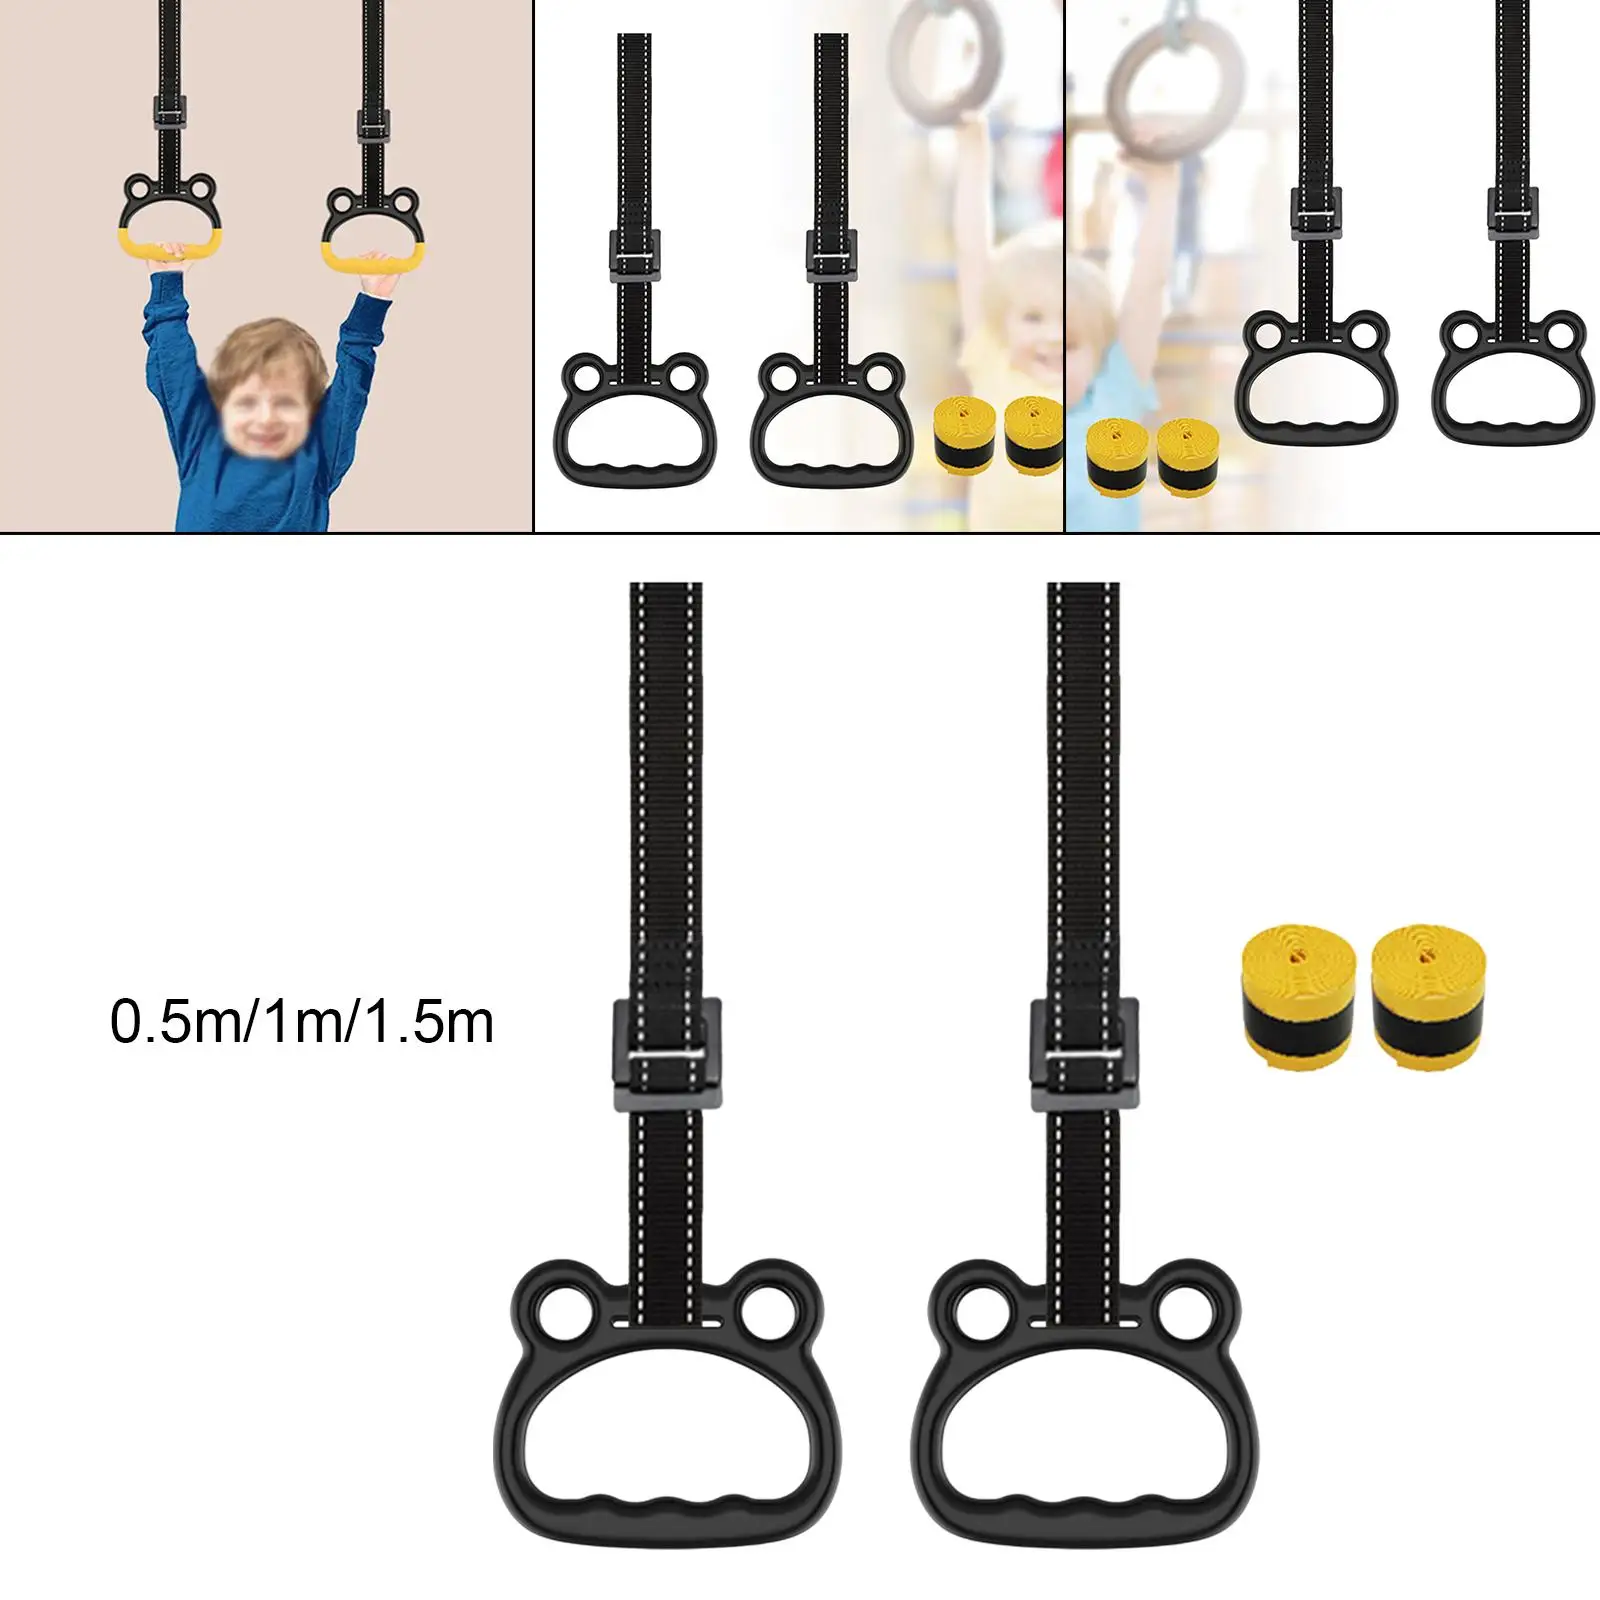 Gymnastics Rings Strength Training Workouts Home Hanging Gym Ring for Kids Adult